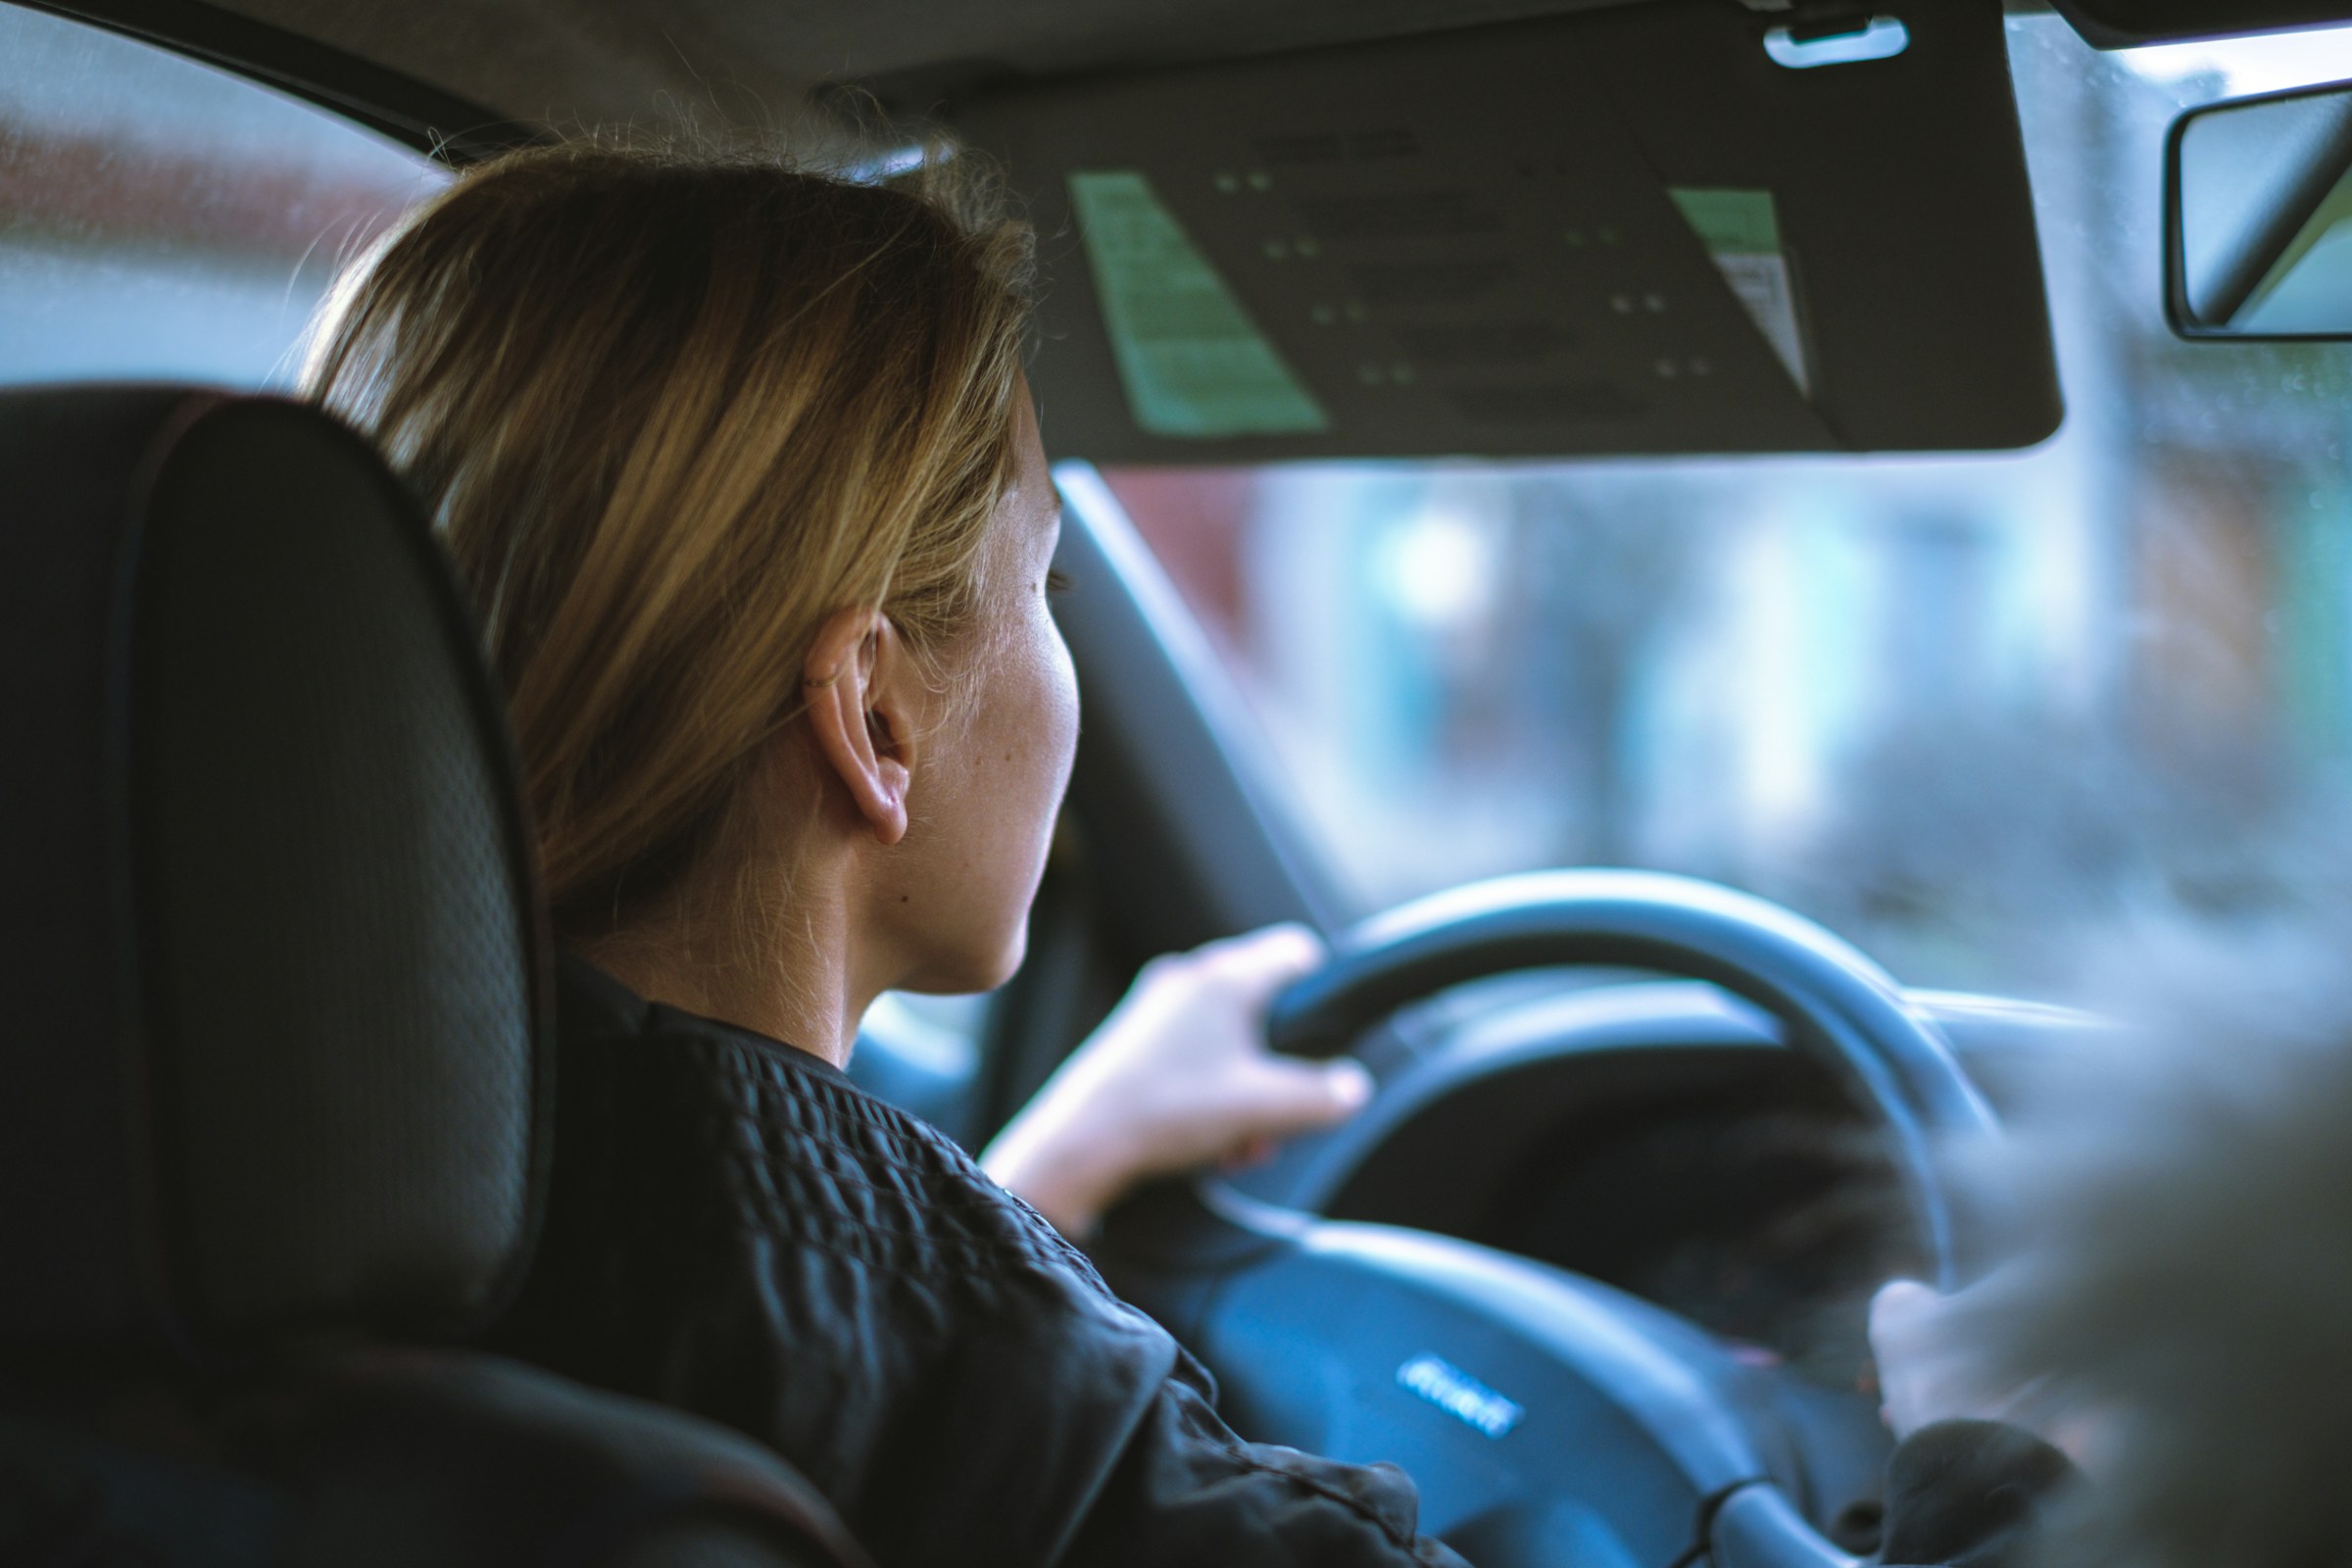 A woman in the driver's seat | Source: Unsplash